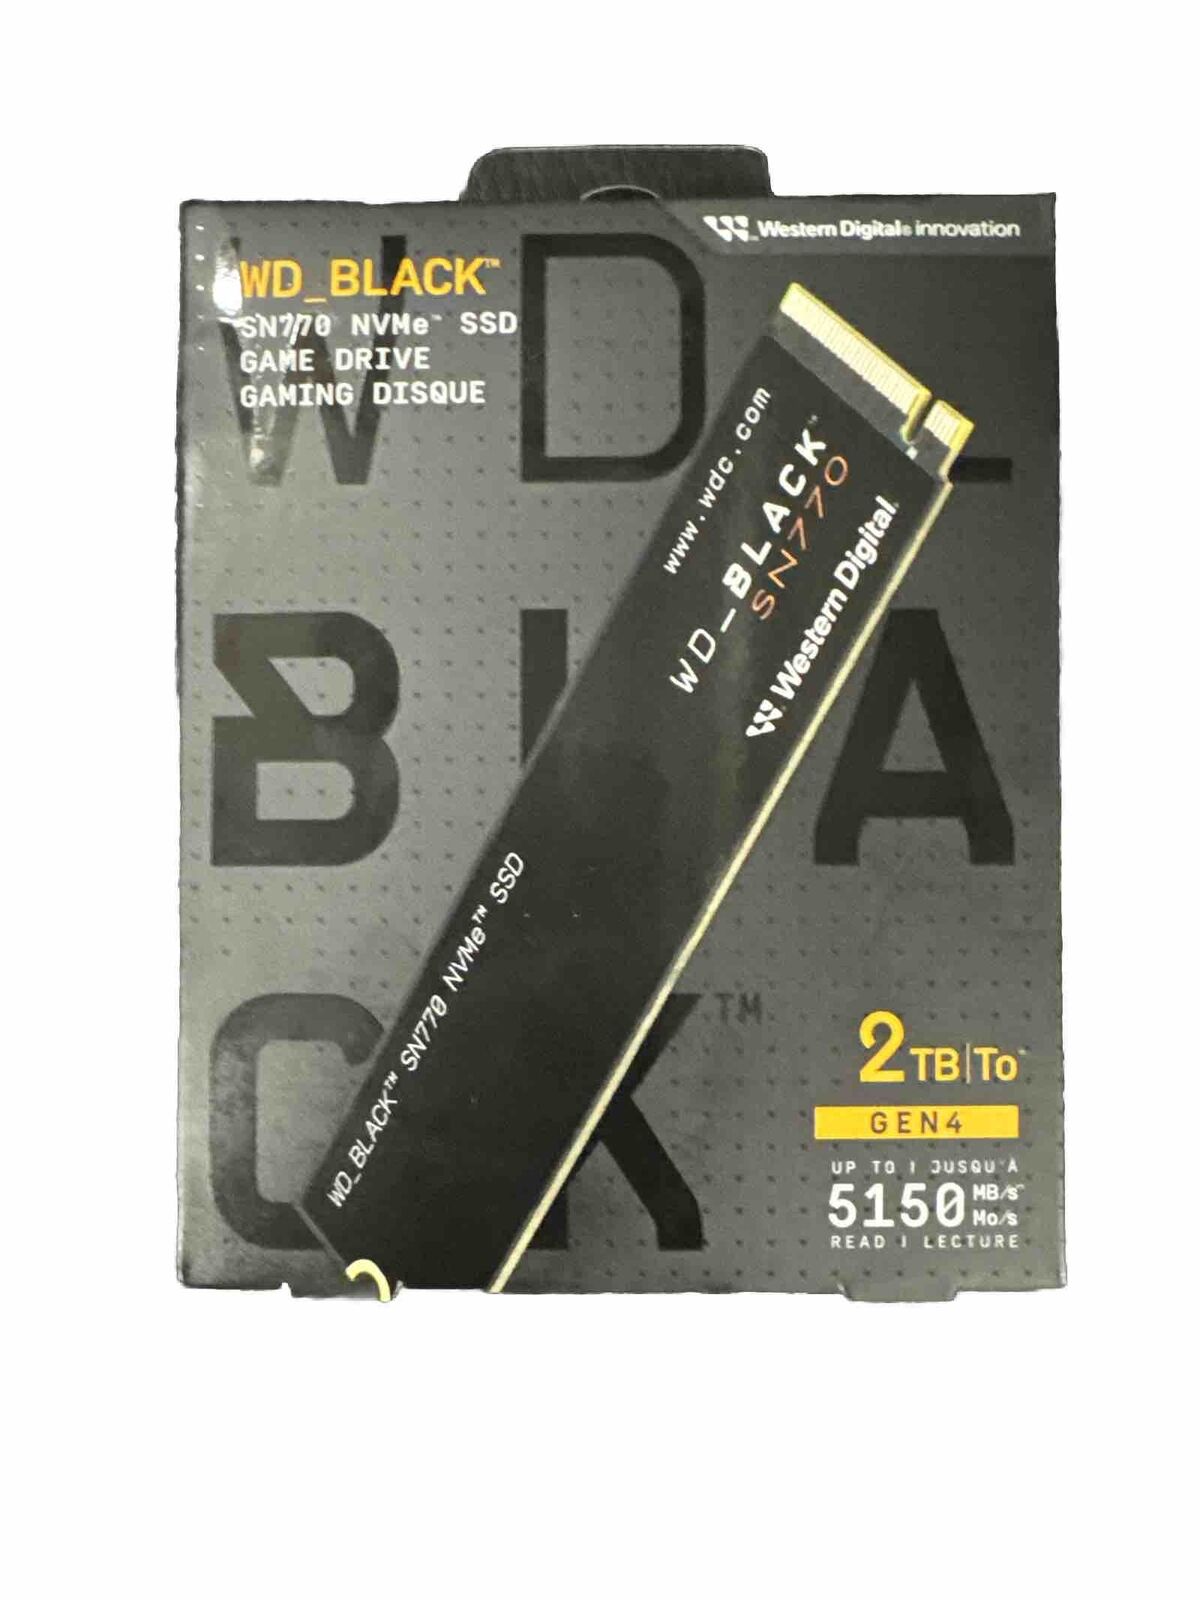 WD_BLACK 2TB SN770 NVMe Internal Gaming SSD Solid State Drives. New In Box